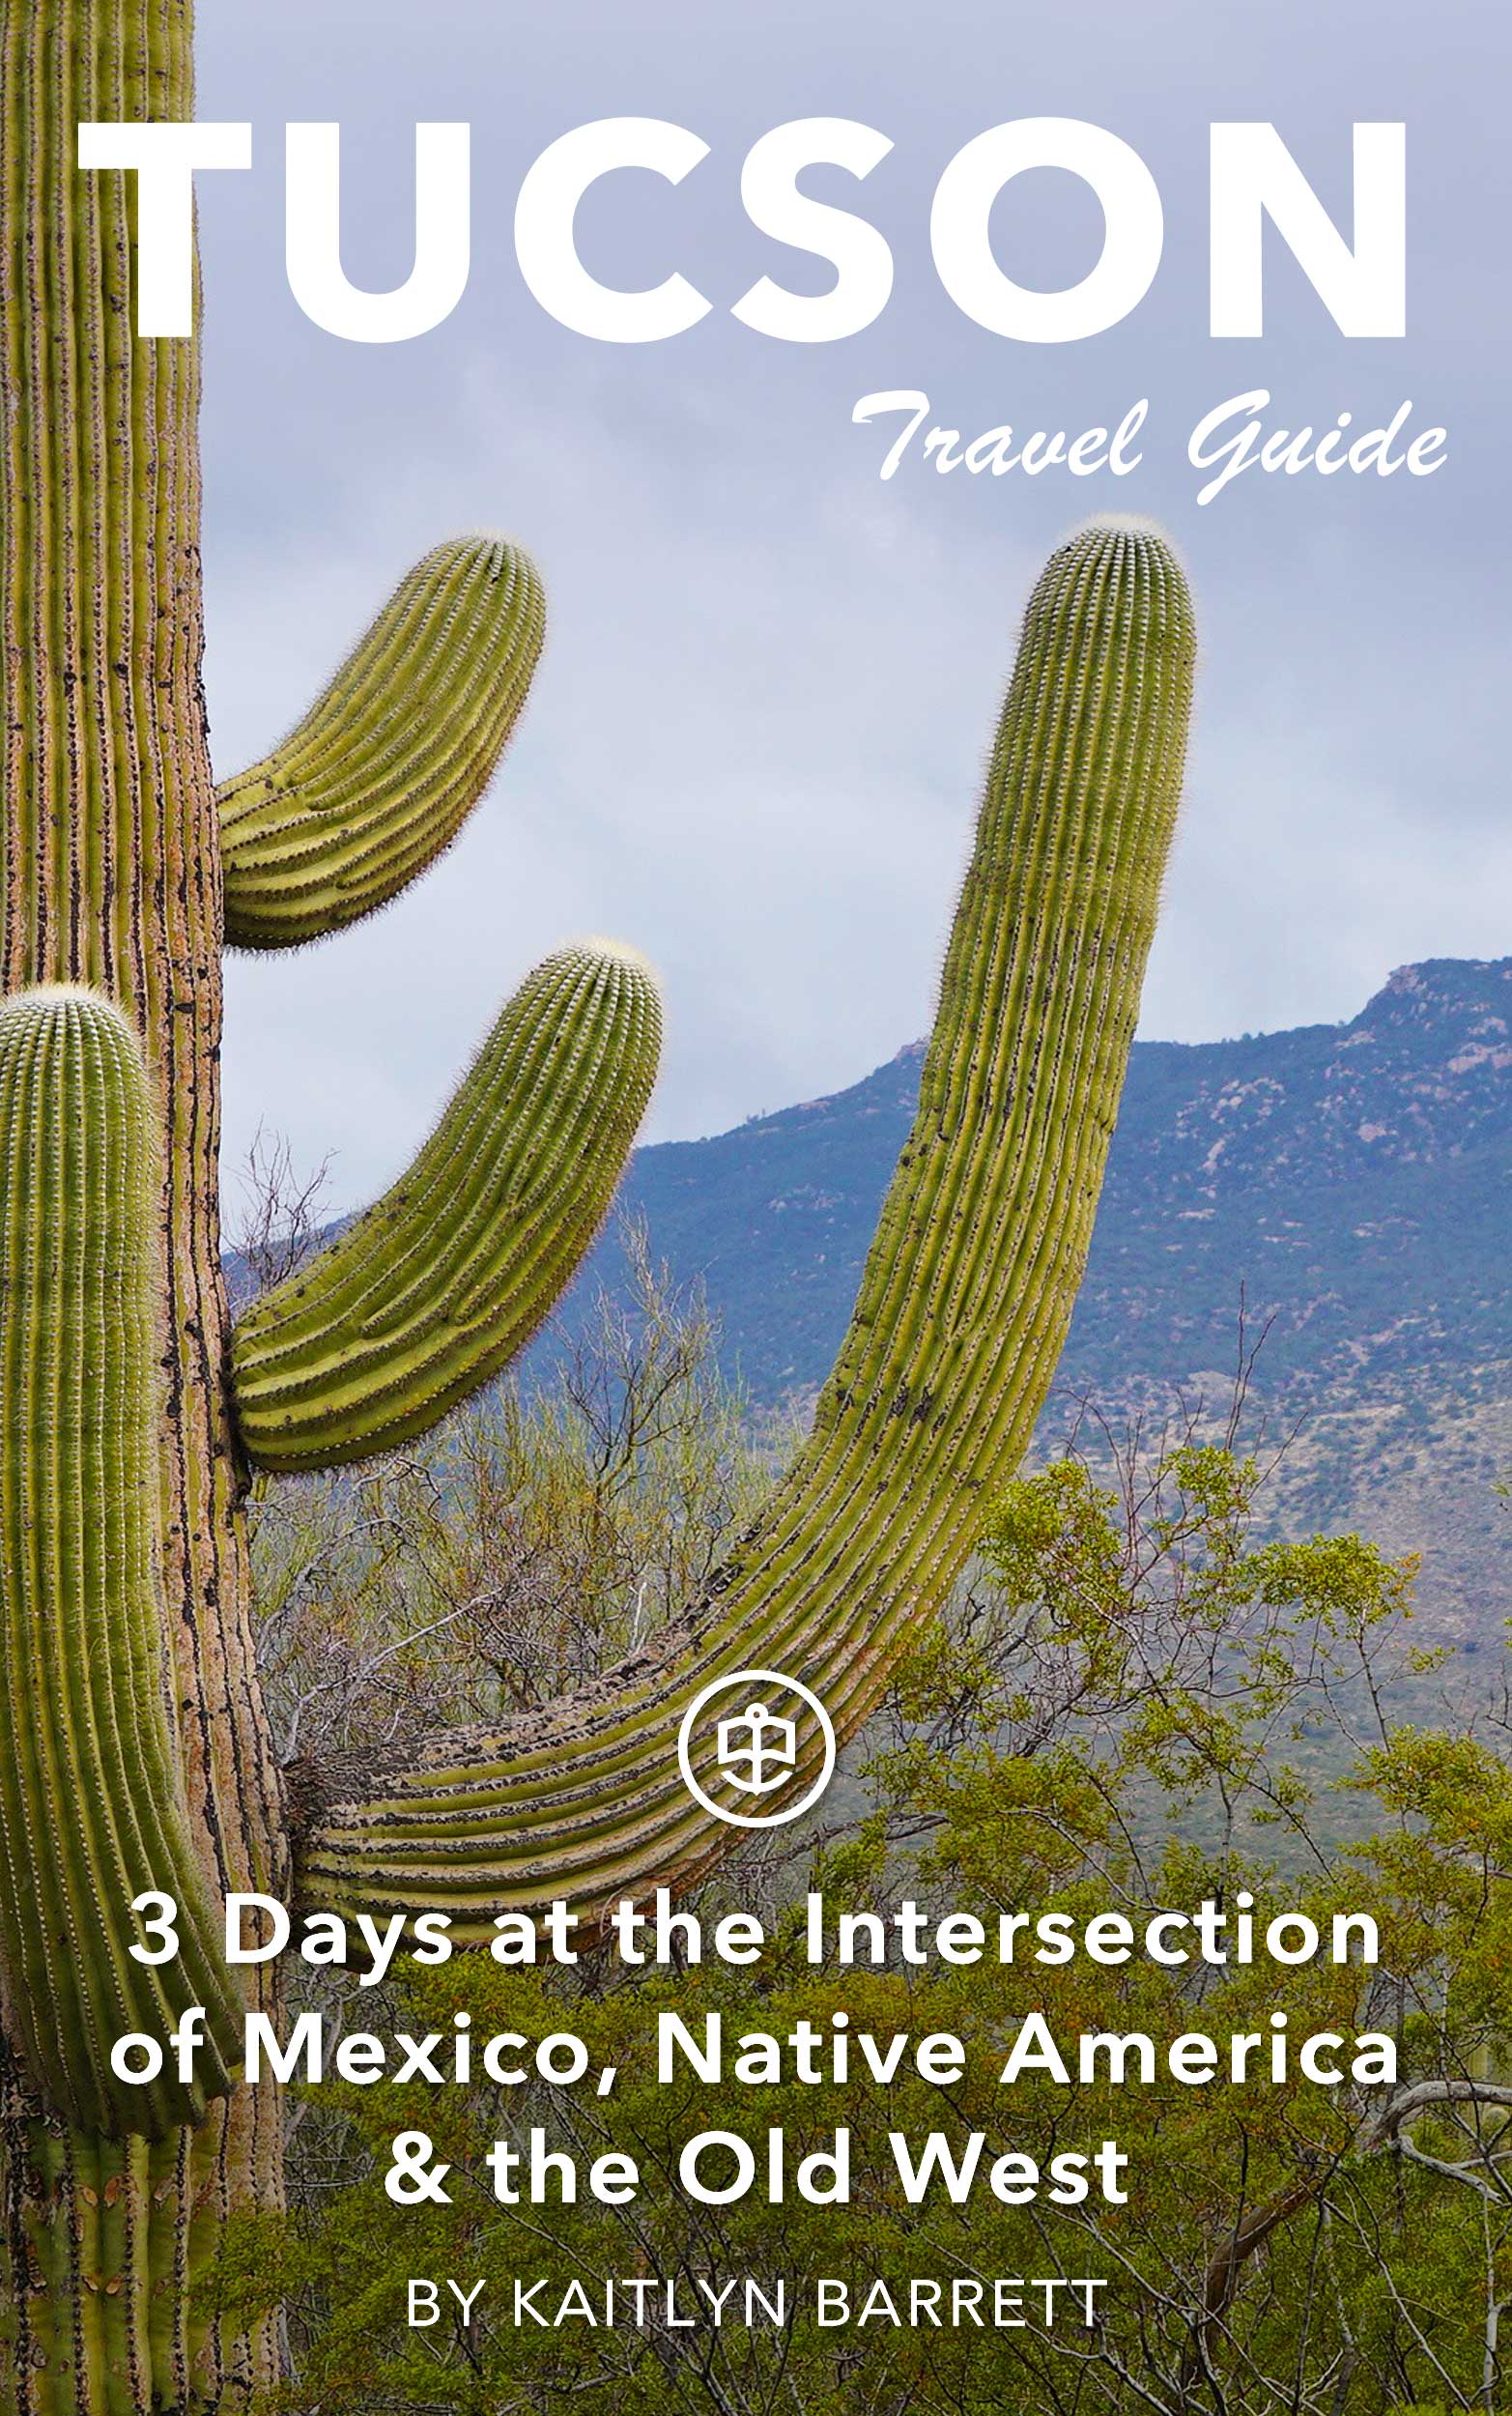 Tucson: 3 Days at the Intersection of Mexico, Native America & the Old West